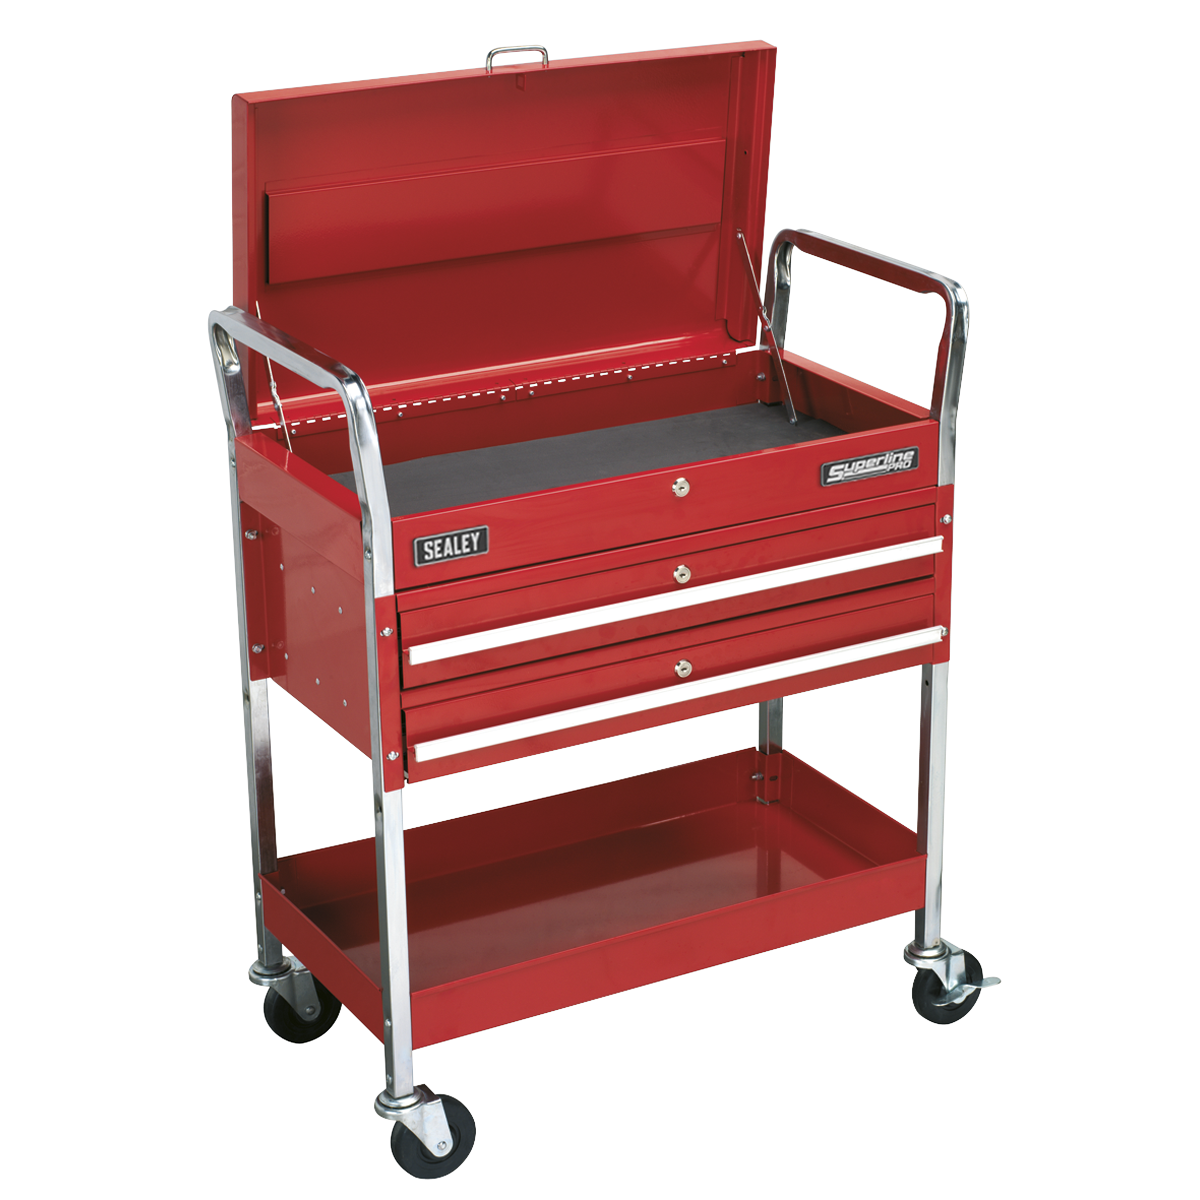 Sealey Trolley 2-Level Heavy-Duty with Lockable Top & 2 Drawers CX1042D